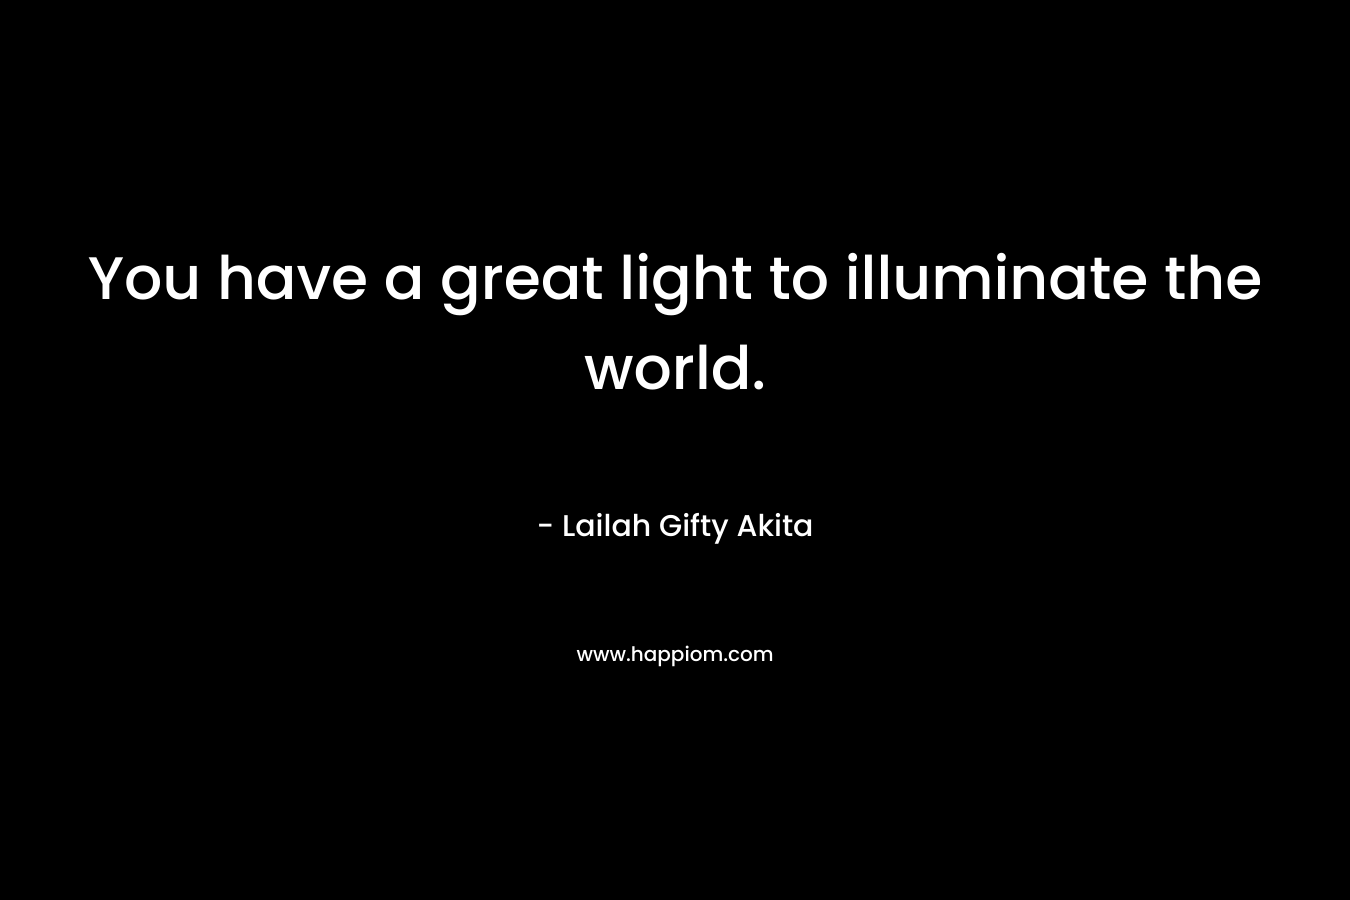 You have a great light to illuminate the world.